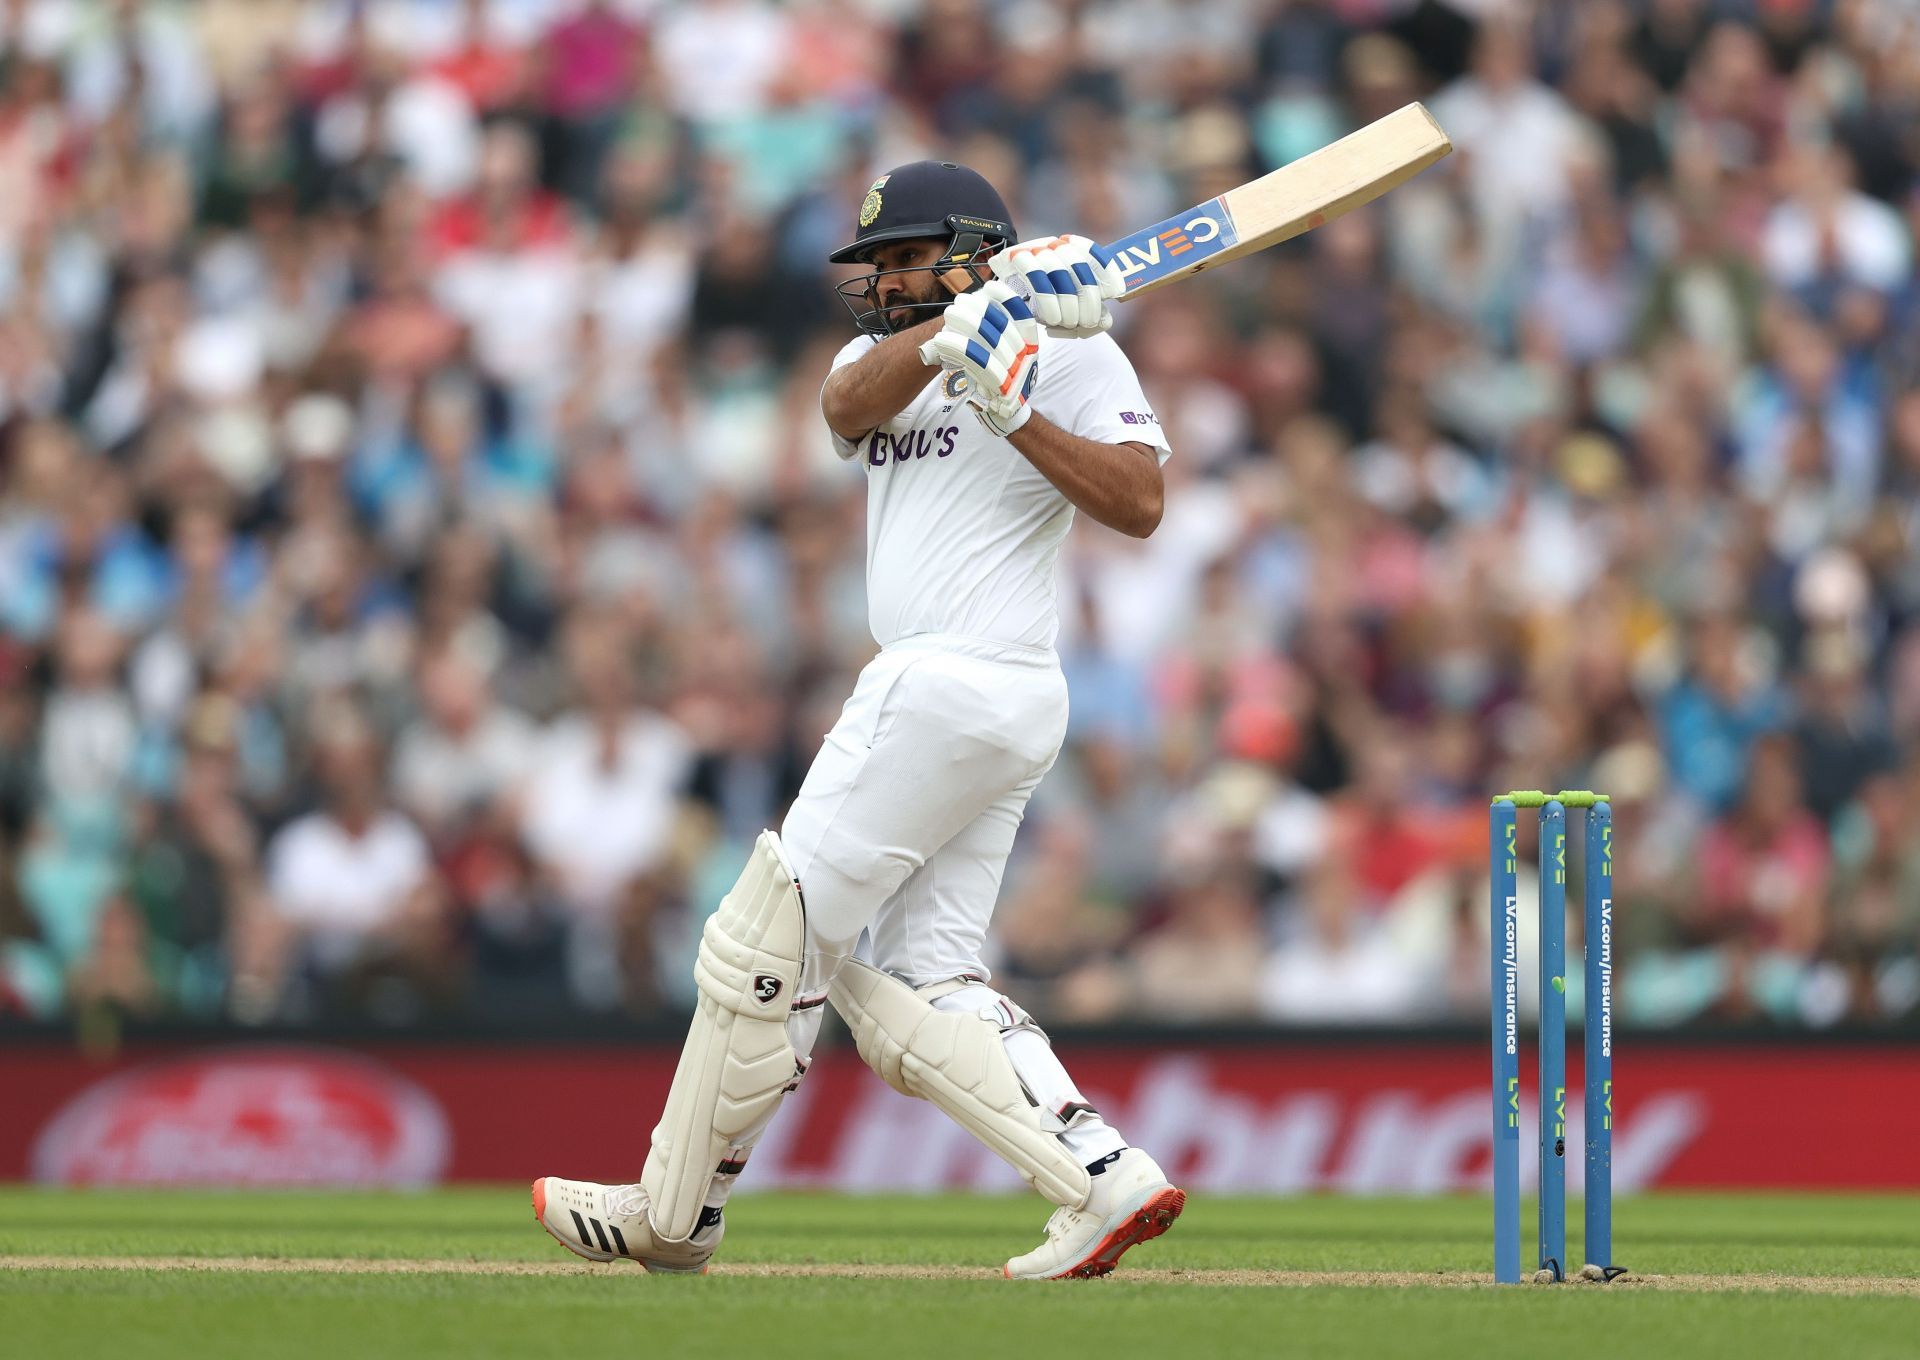 Rohit Sharma has stood out as an opener in Test cricket